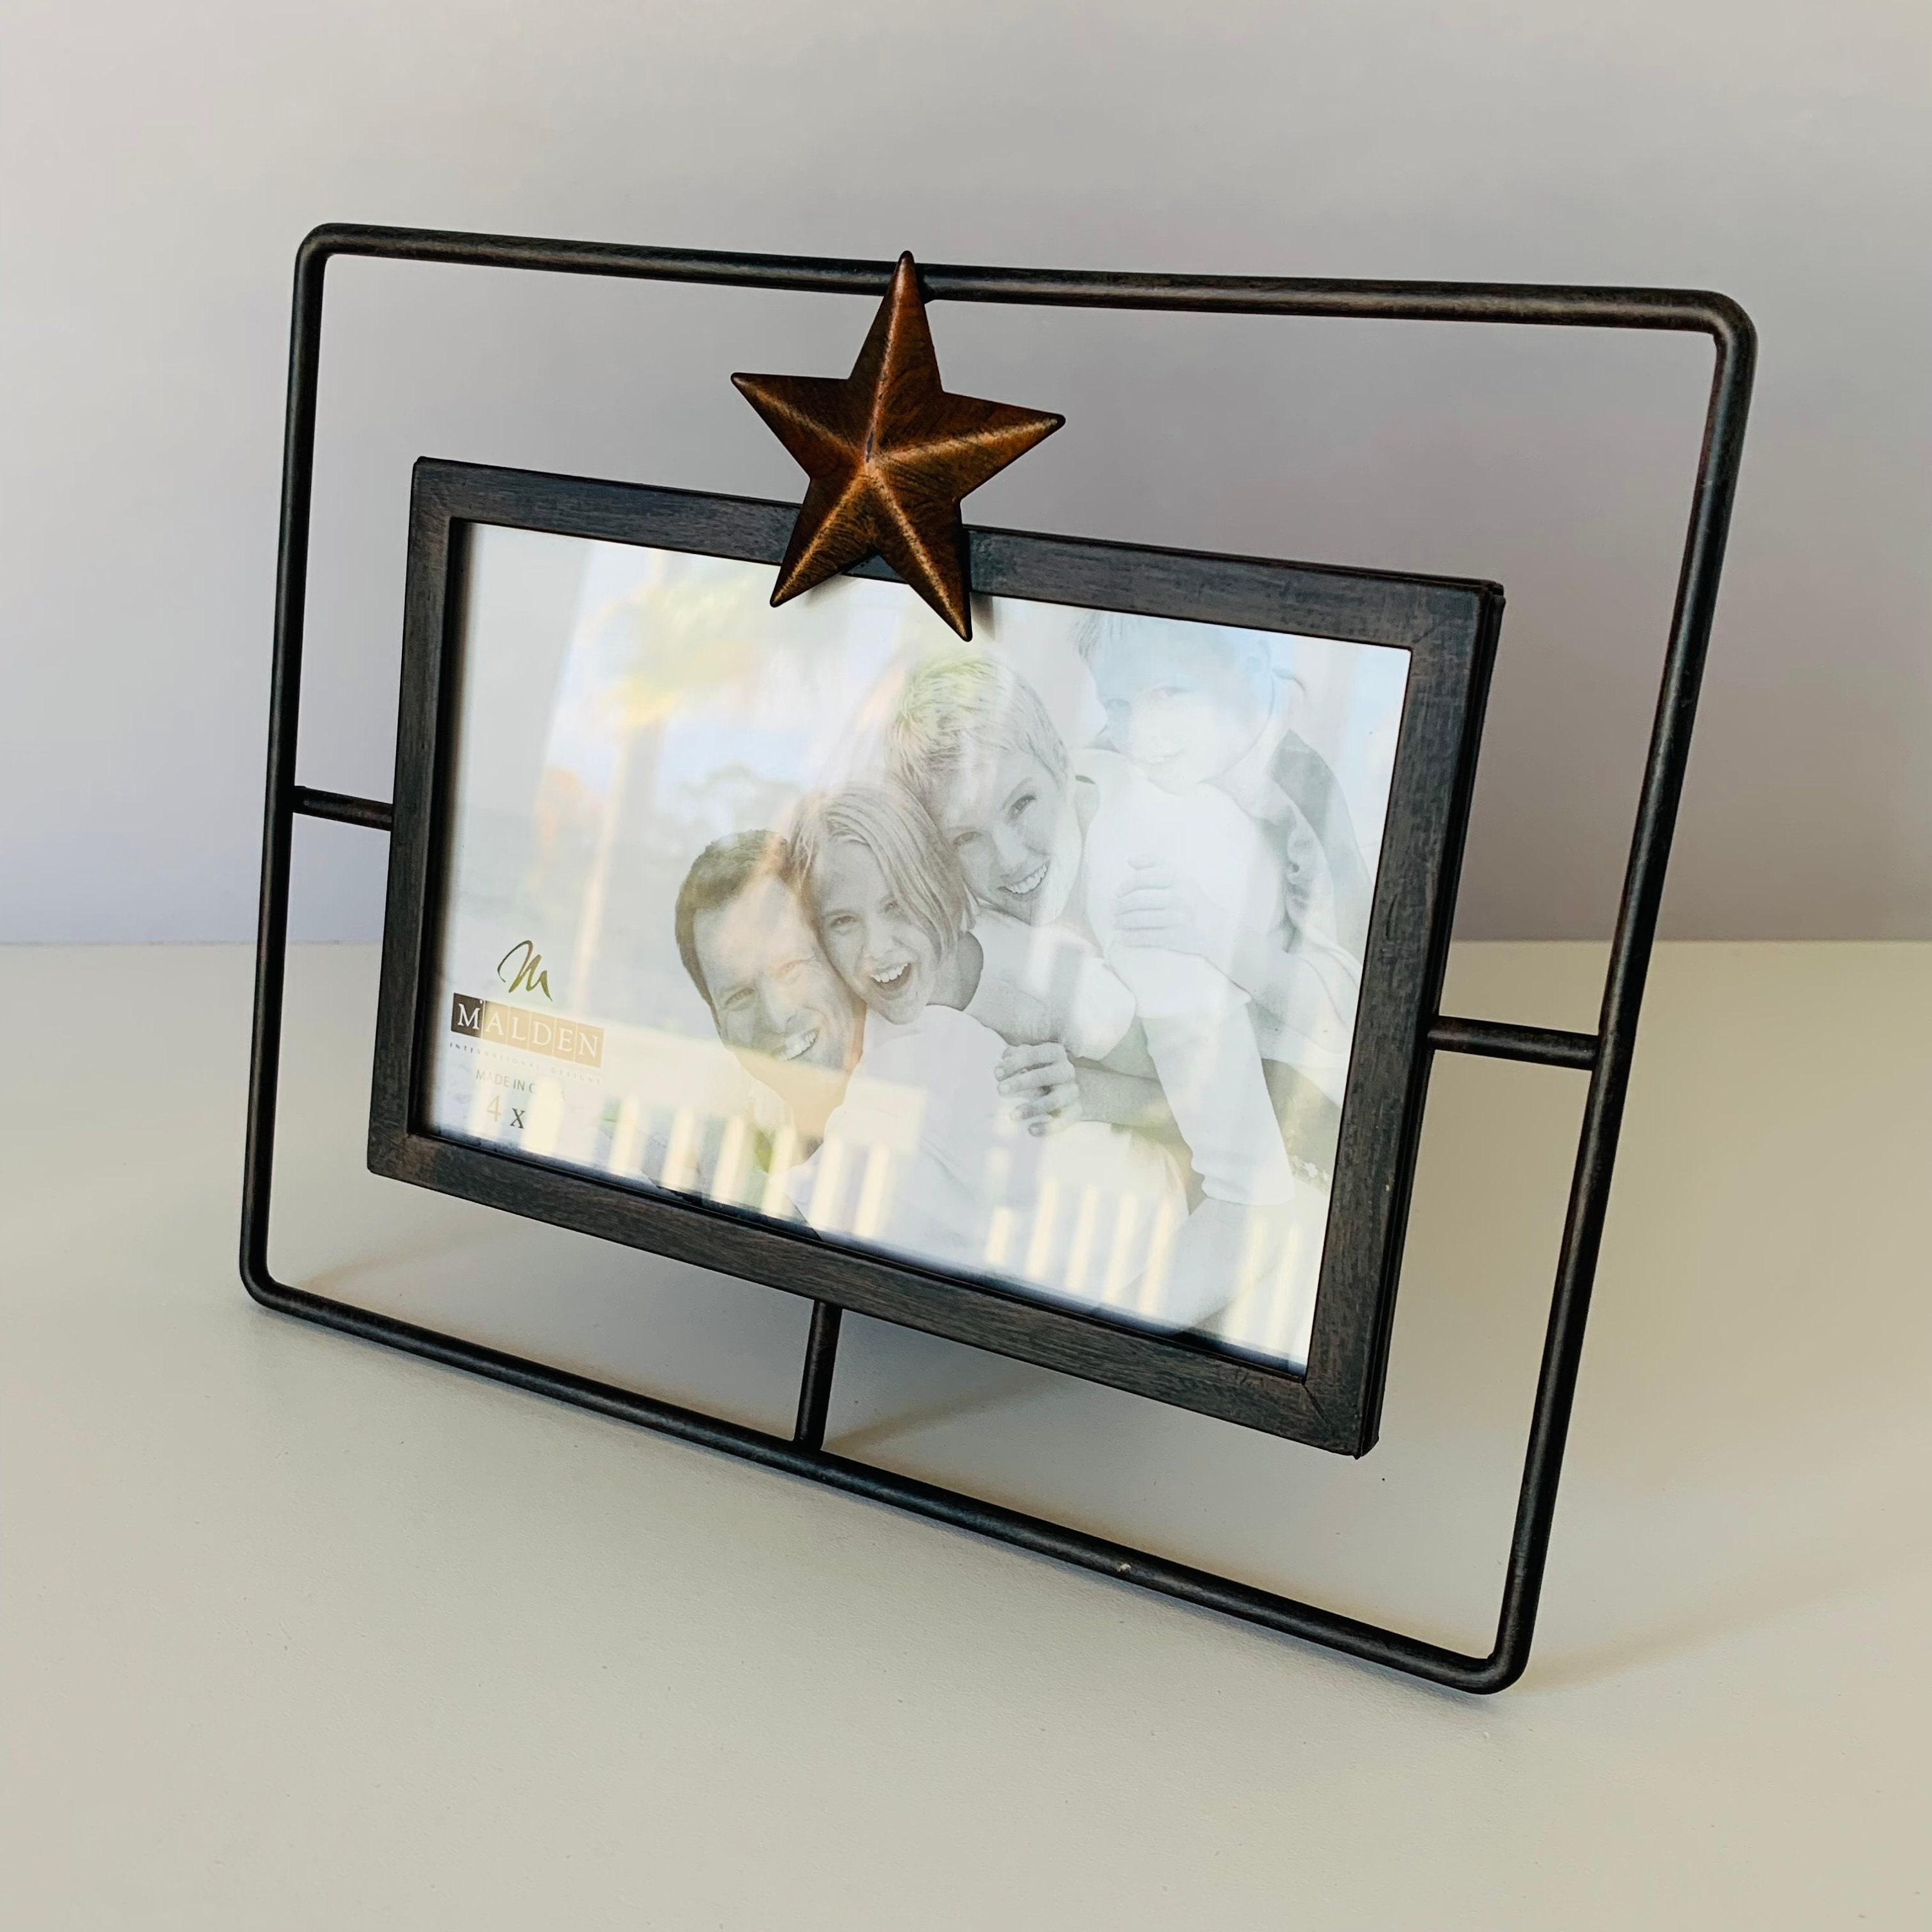 Malden International Designs 4x6 Family Picture Frame Family Knows You The  Best & Loves You The Most White MDF Wood Frame Routed Gray MDF Wood Base